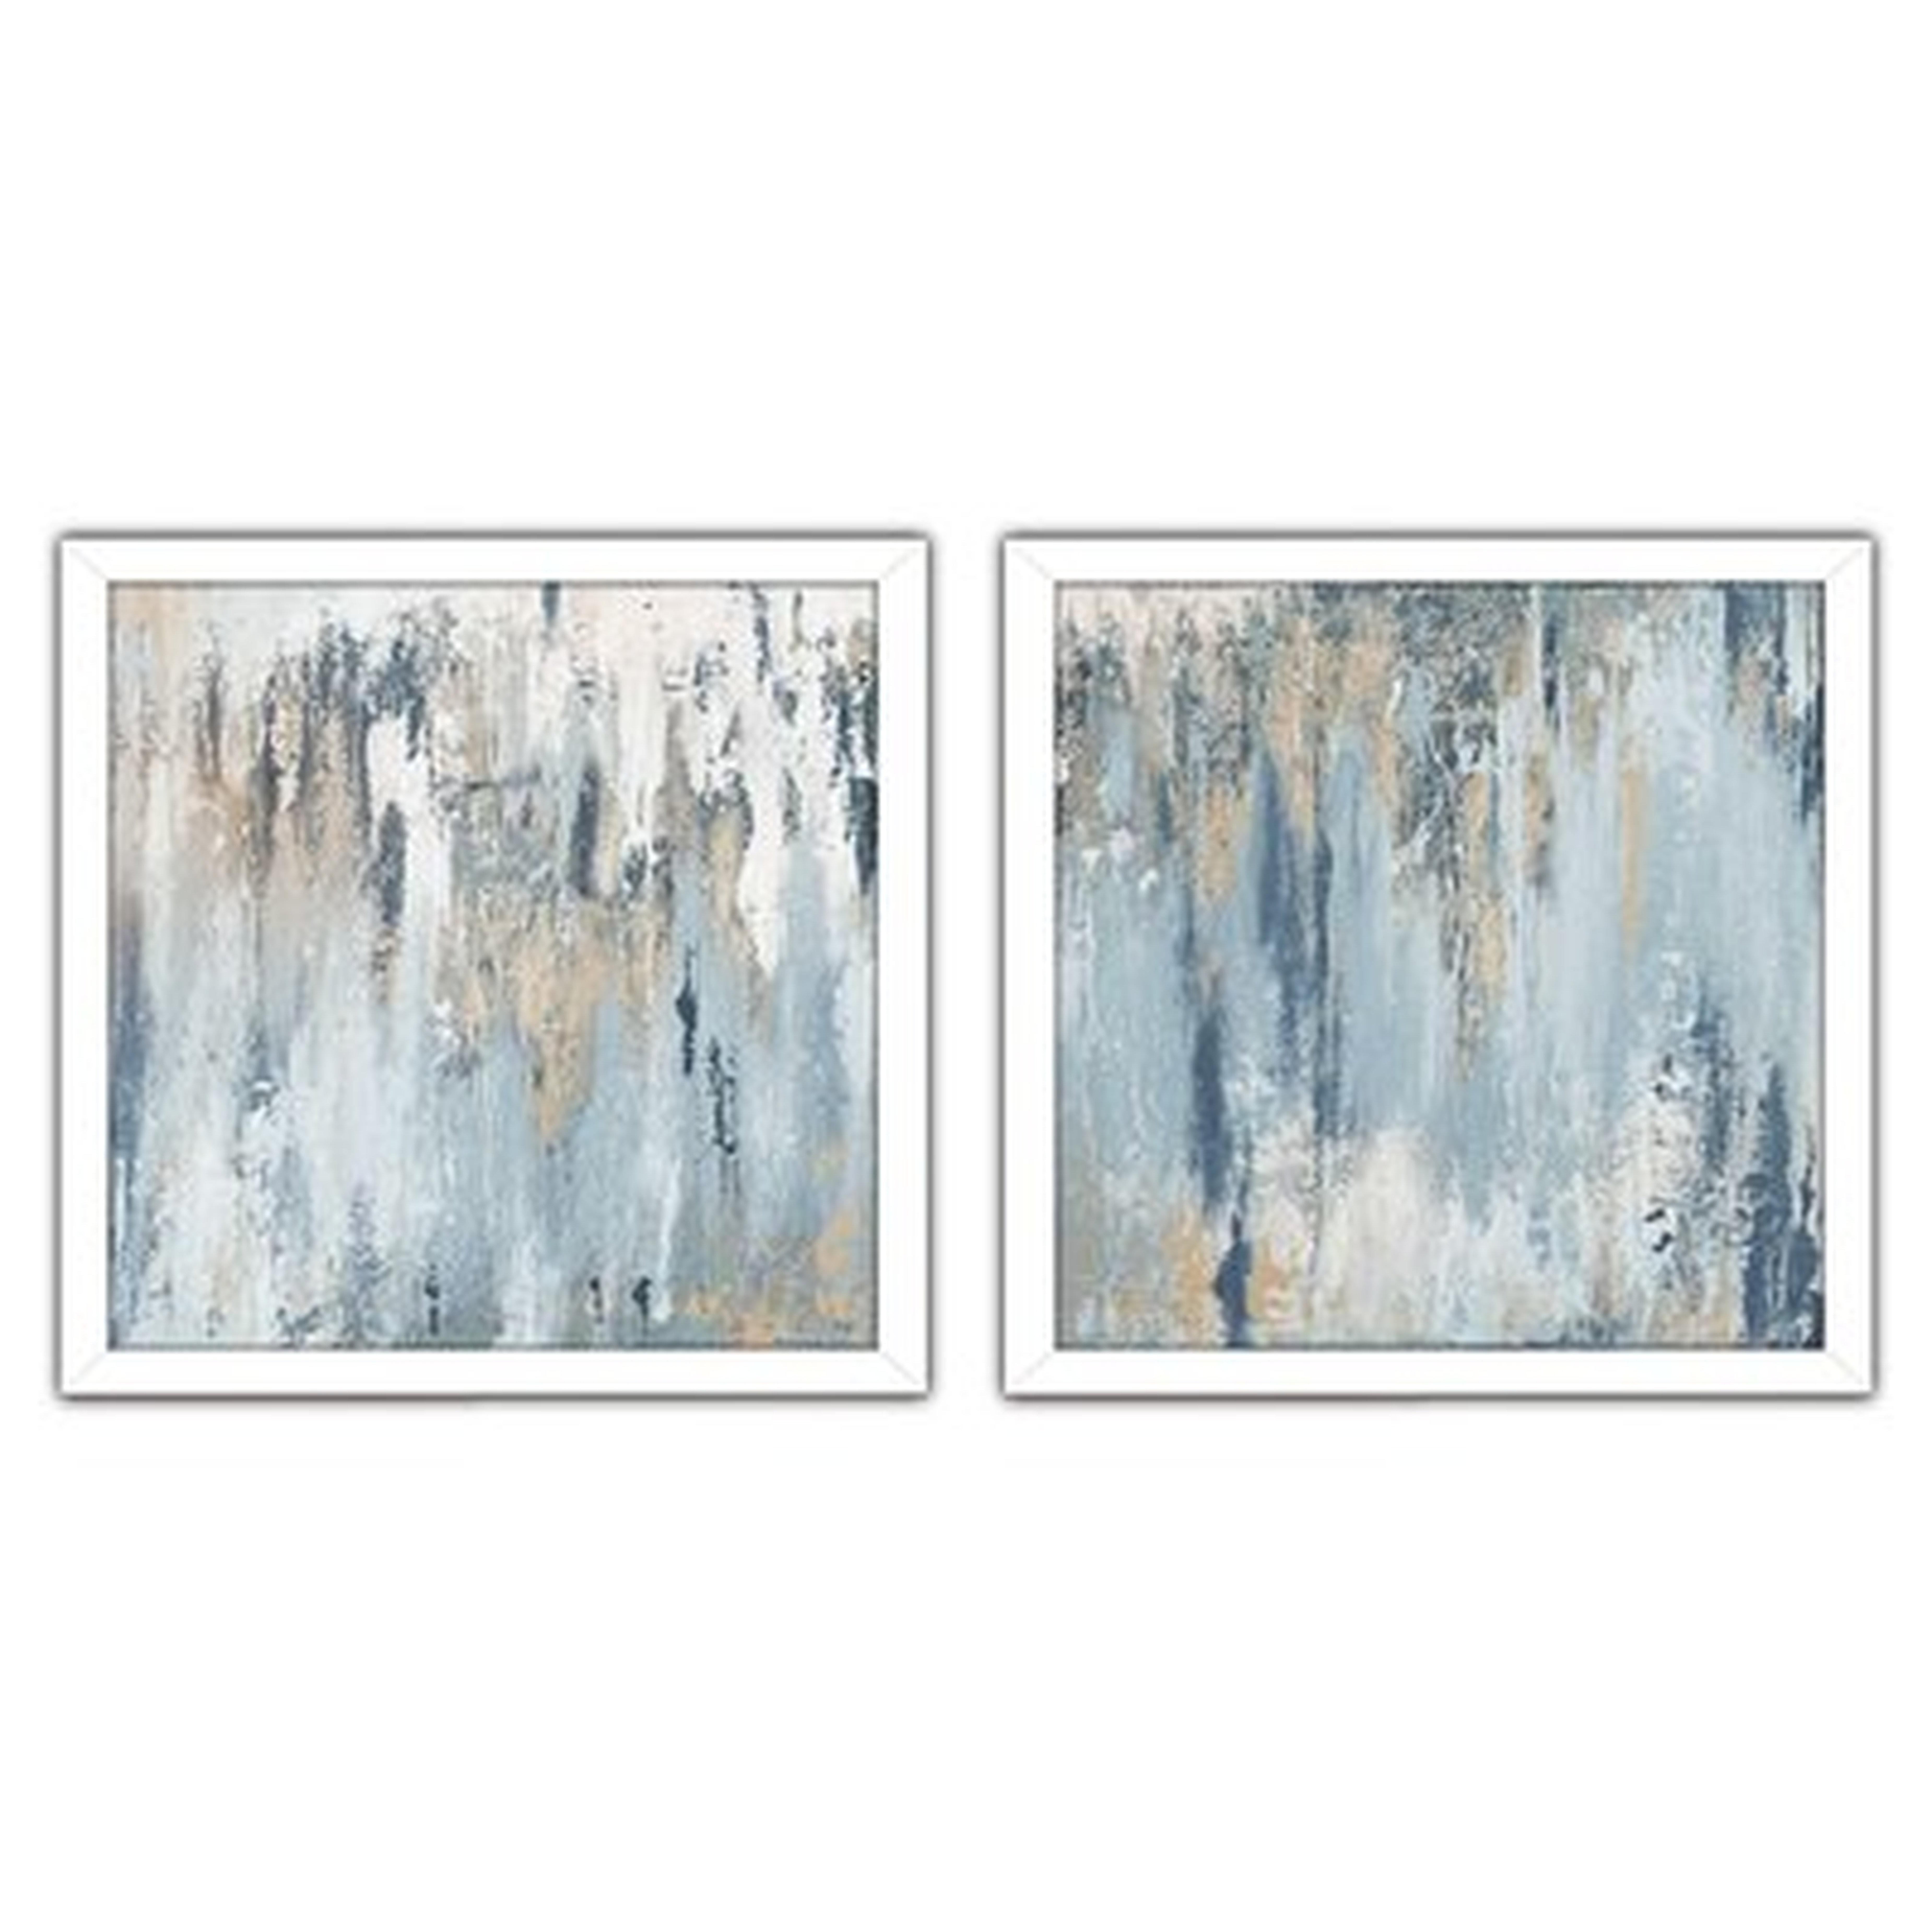 Blue Illusion Square by Patricia Pinto - 2 Piece Wrapped Canvas Print Set - Wayfair